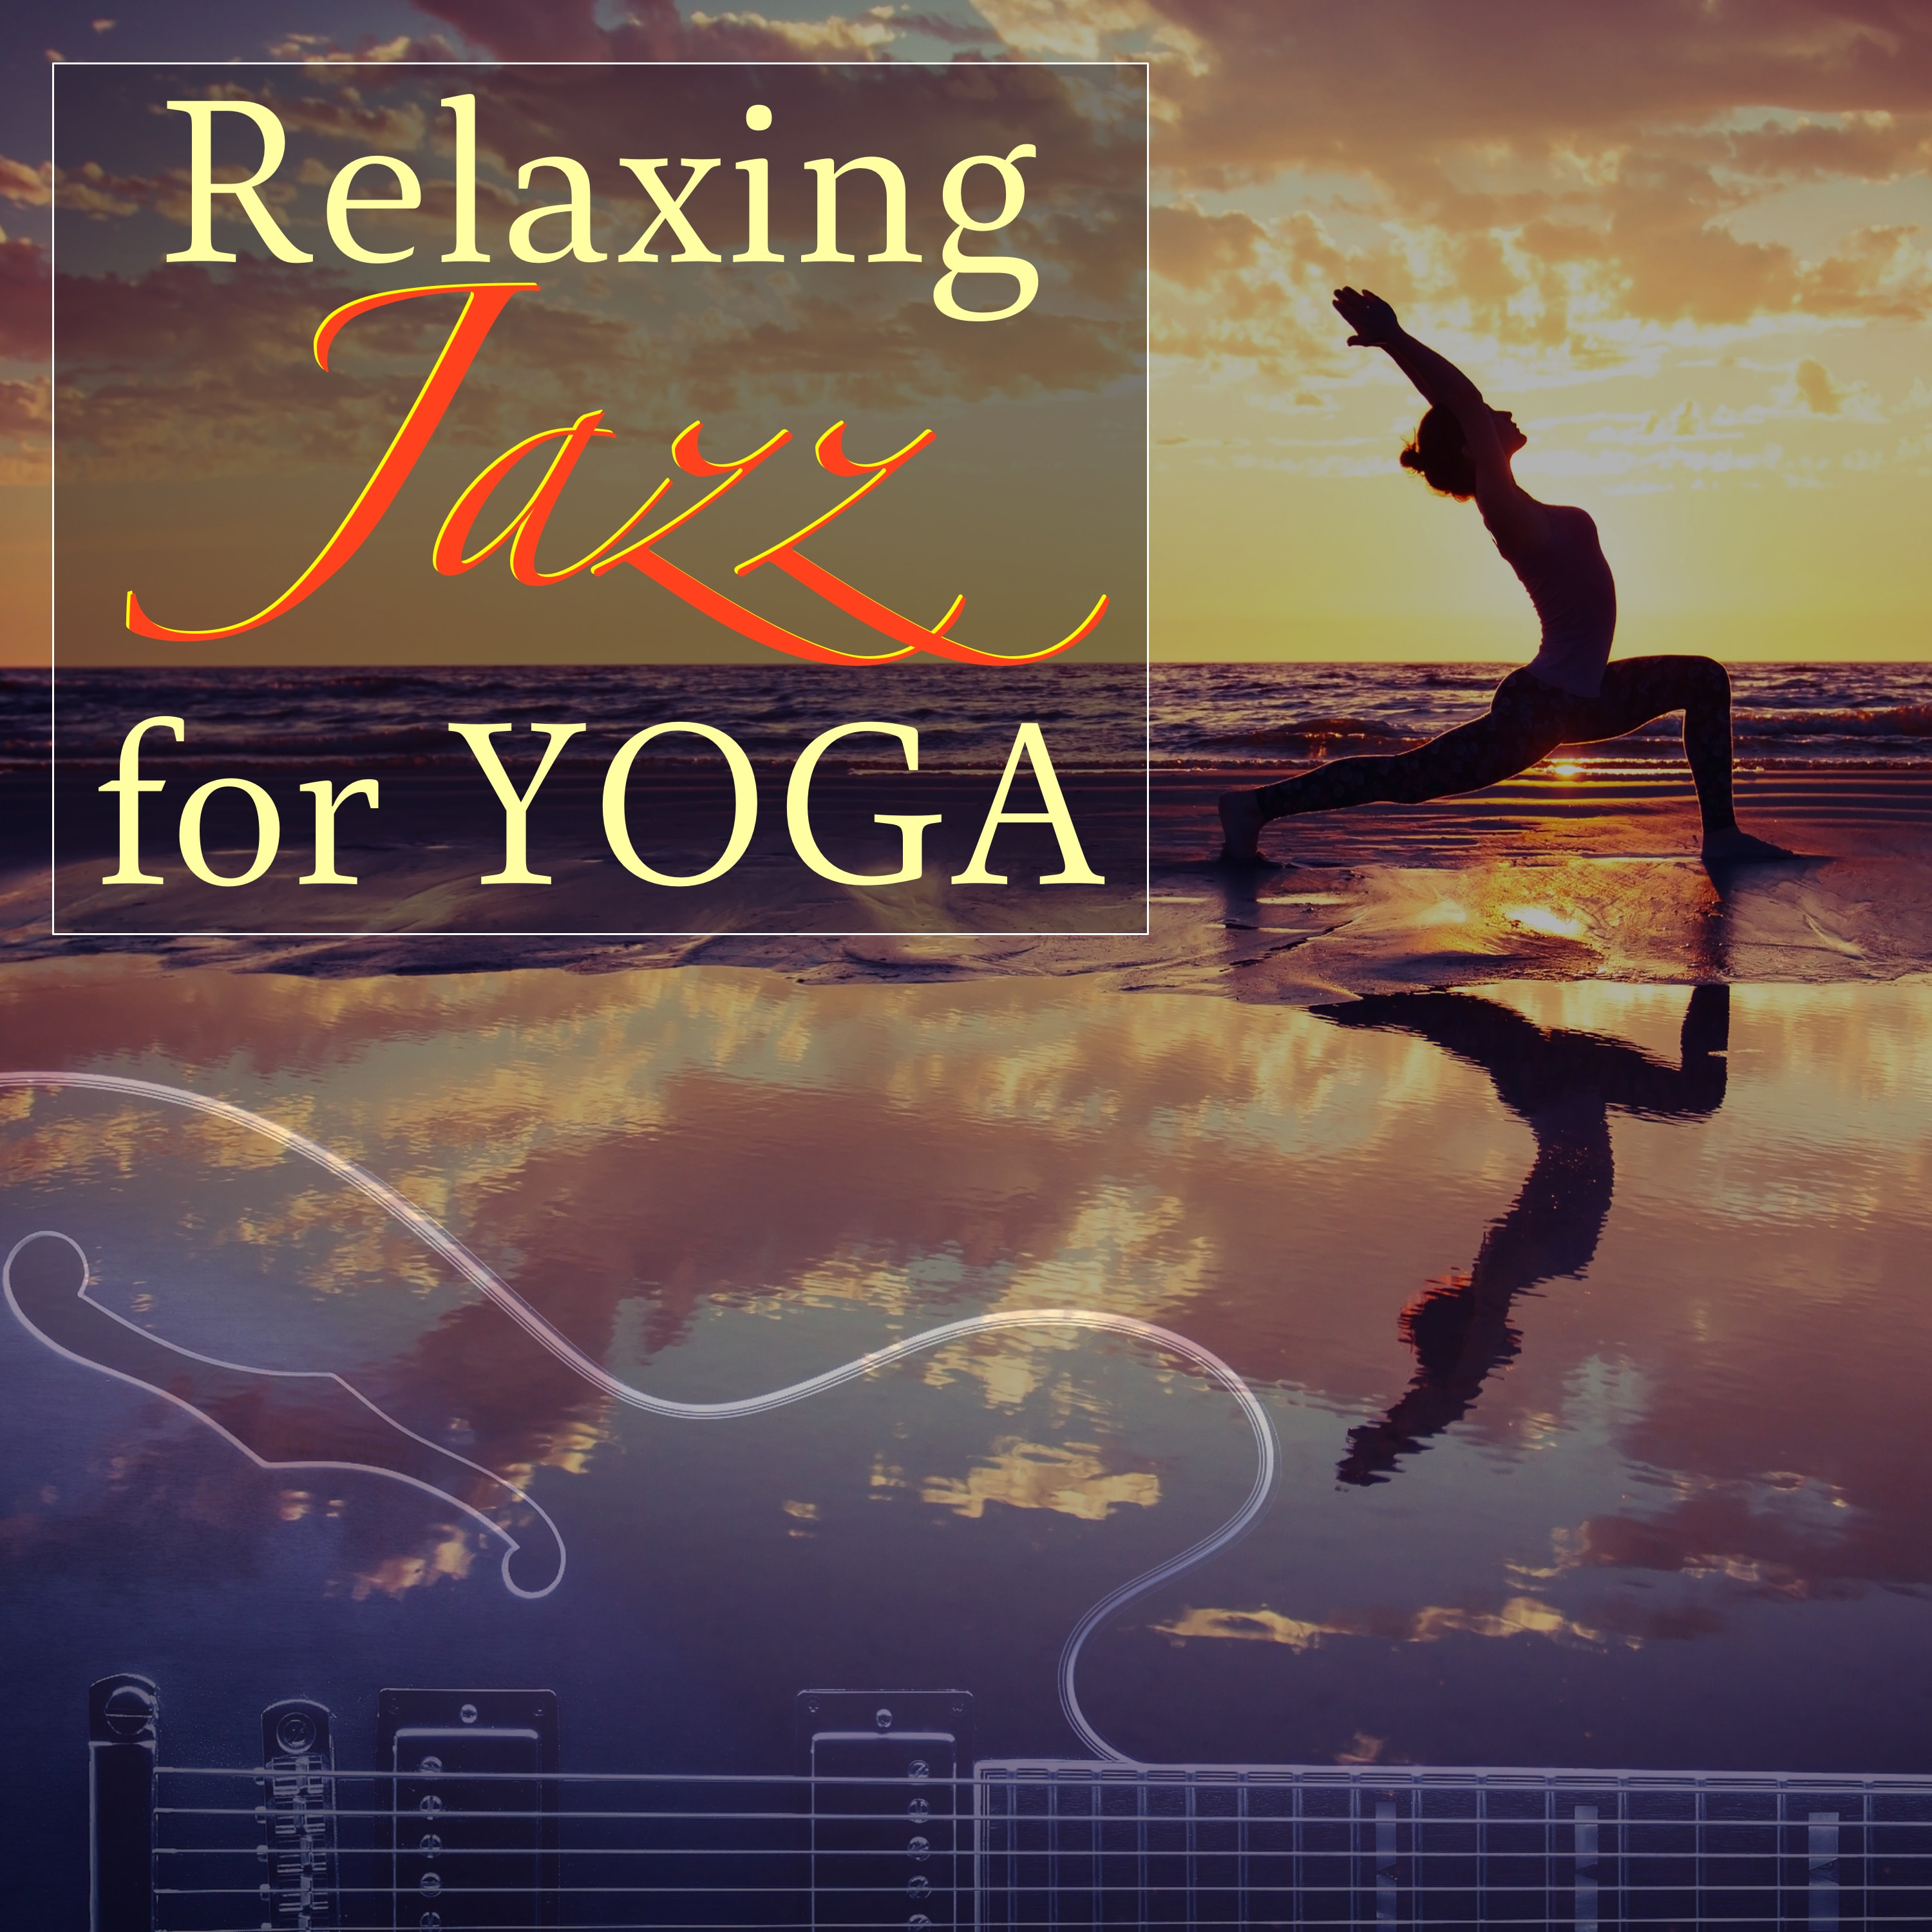 Relaxing Jazz for Yoga  - Smooth Jazz, Soft Jazz, Bossanova for Yoga Class and Exercises